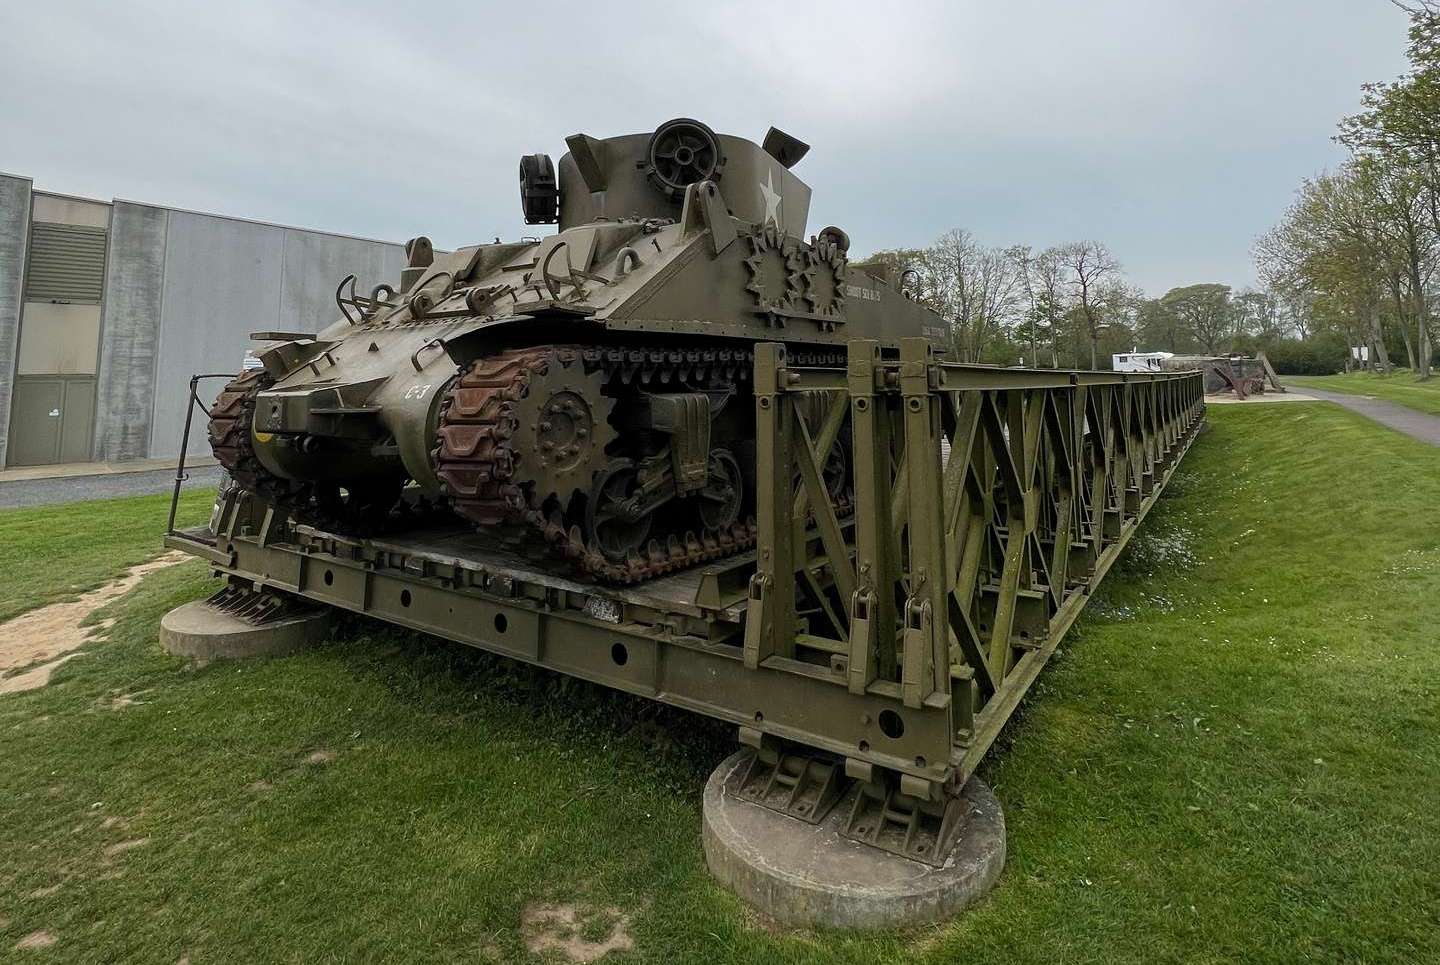 Tank exhibit outside Overlord Museum in Normandy, France. Is there any such thing as a good beach in Normandy?